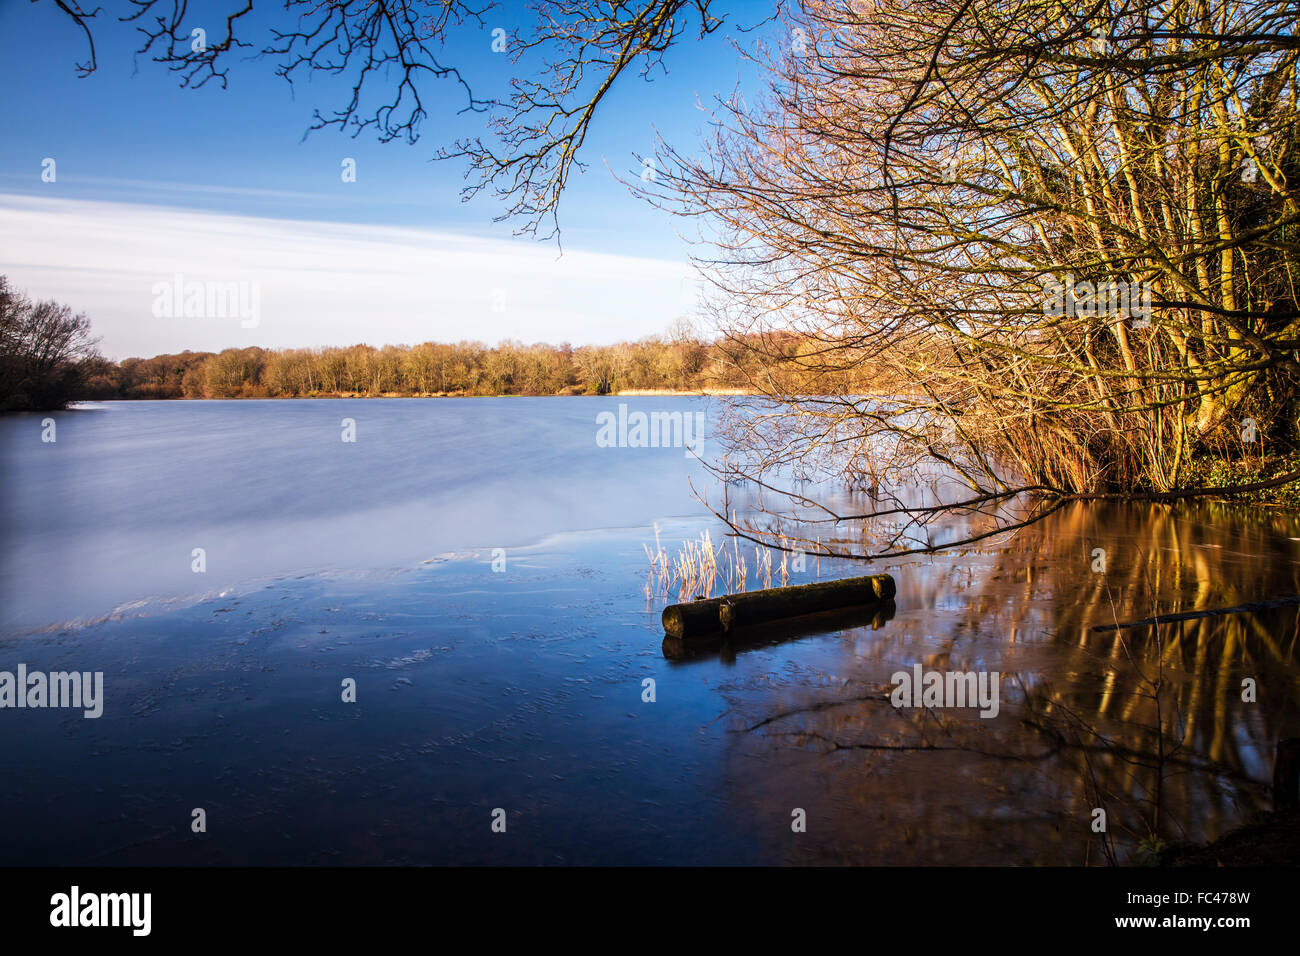 A sunny winter's day on Coate Water in Swindon. Stock Photo